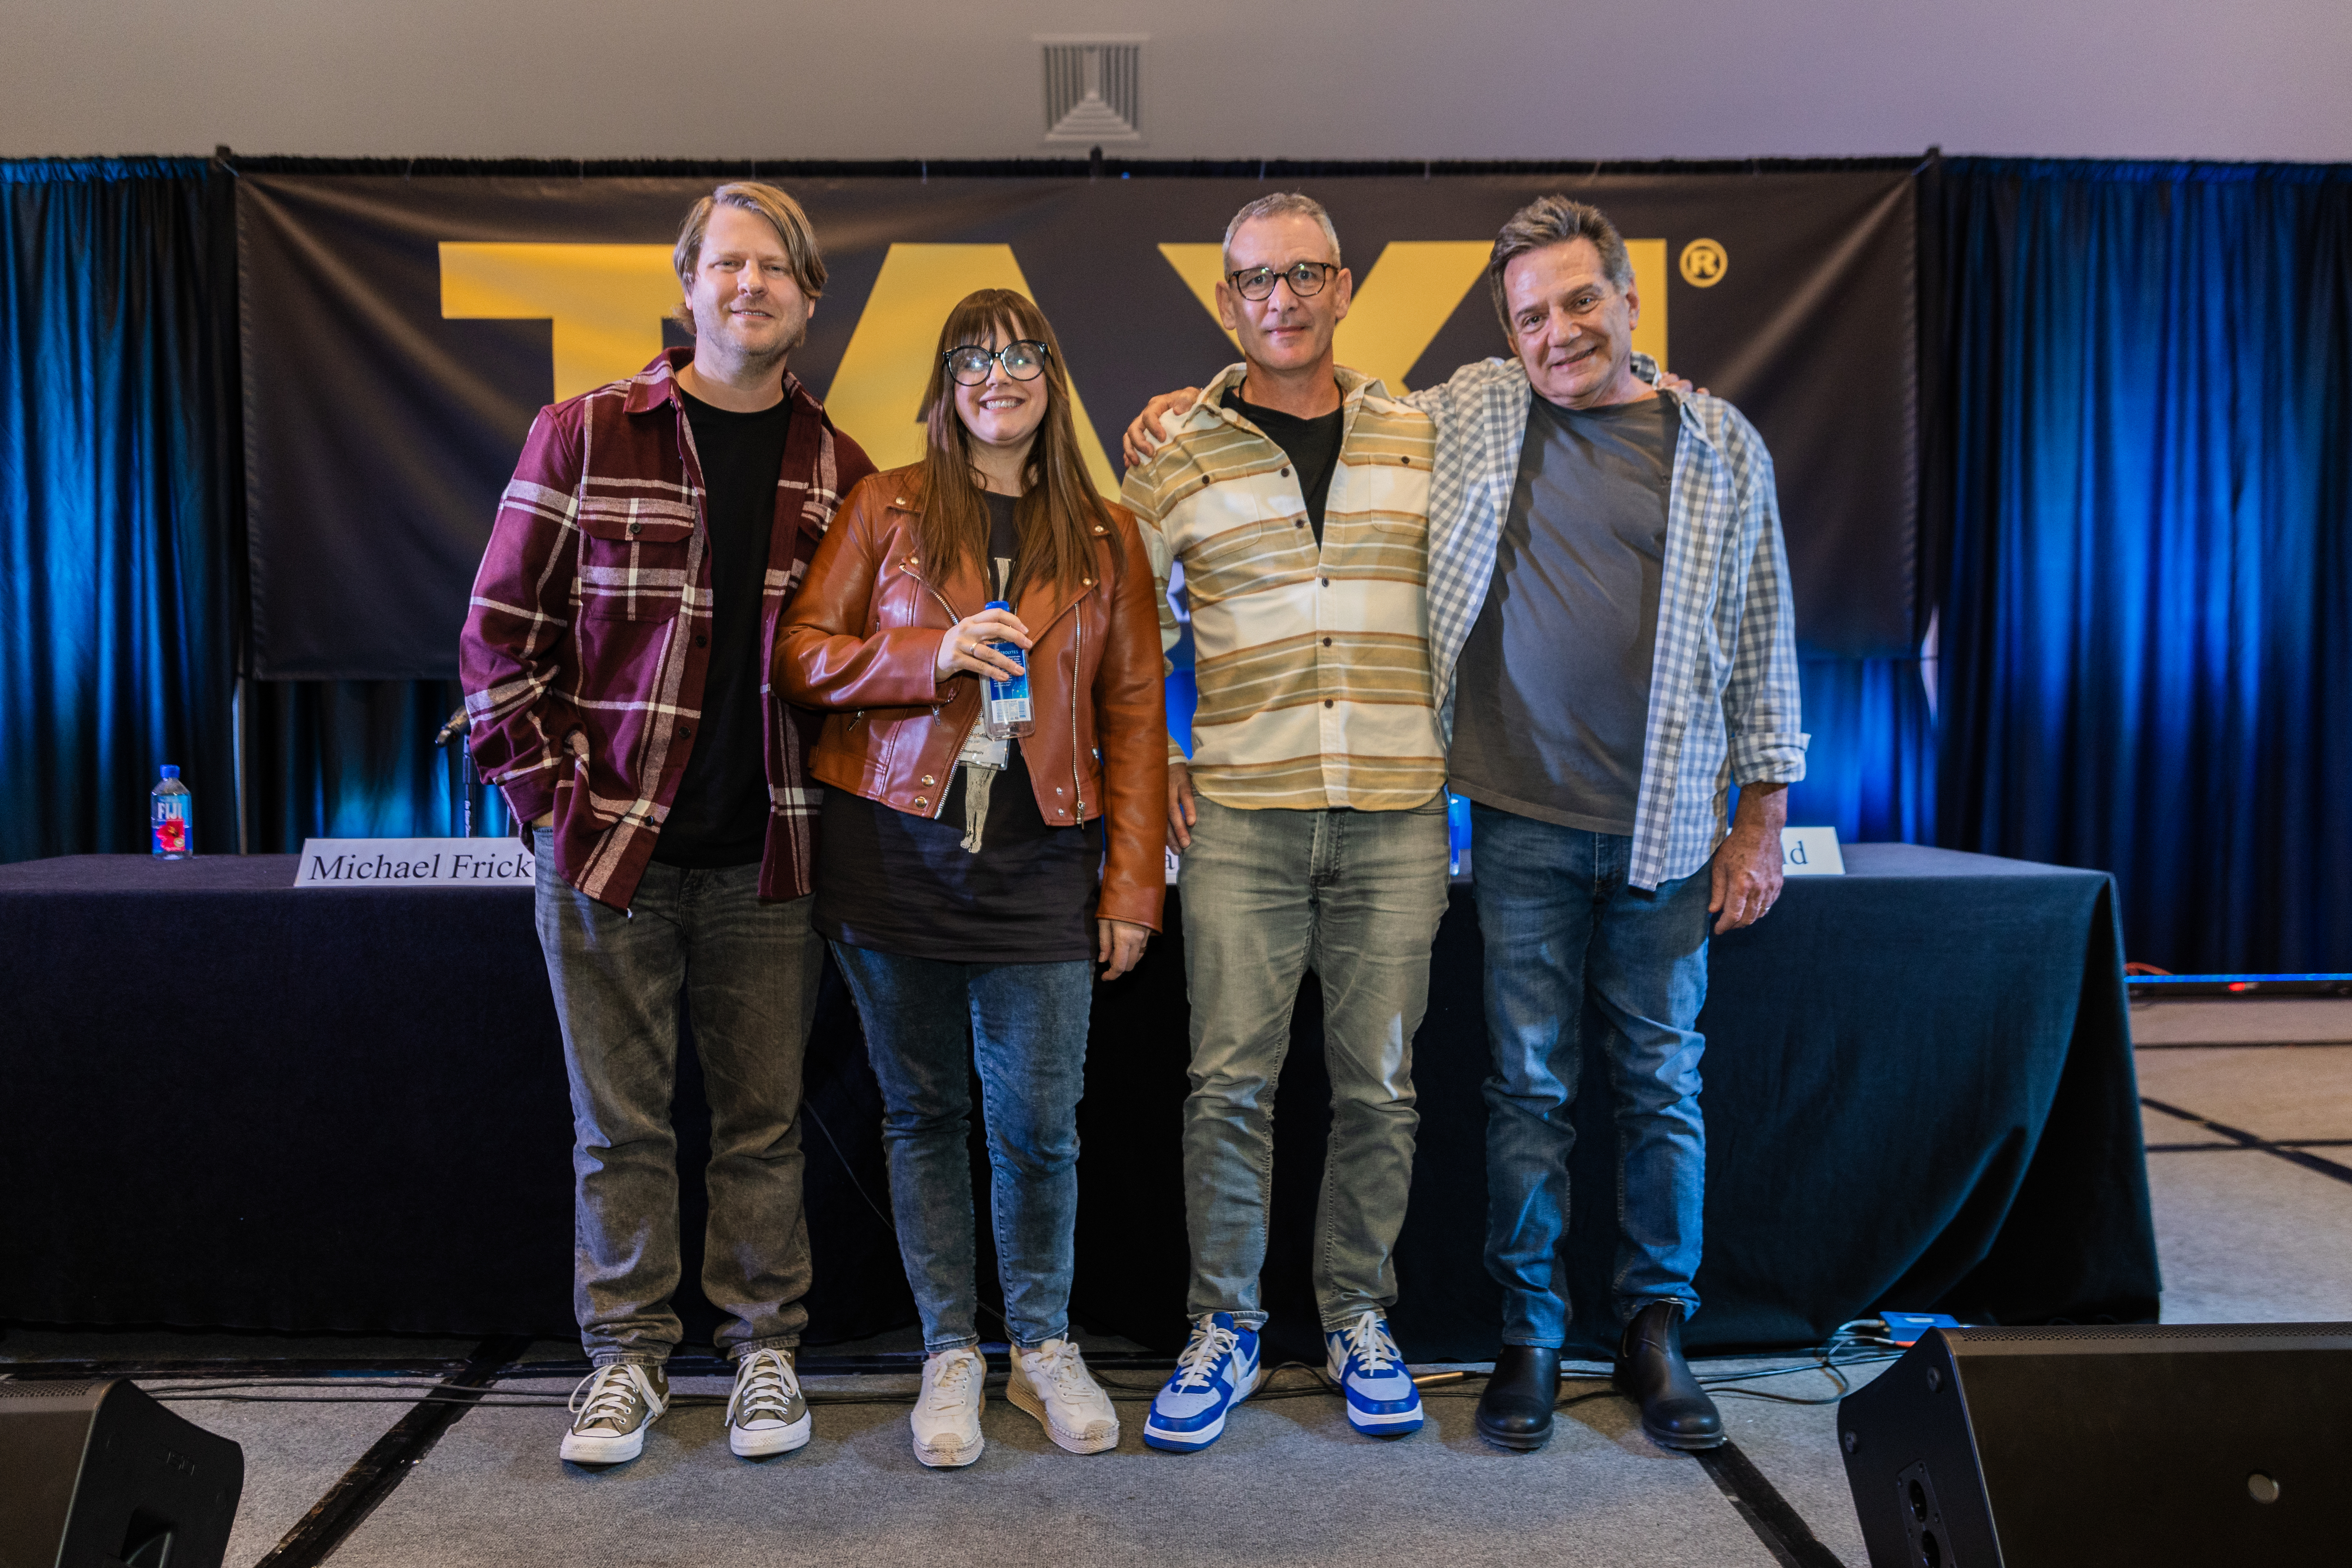 (Left to right) Super successful ad music songwriter/producers Nate and Kaelie Highfield (aka The Highfields) teamed up with Music Supervisor Michael Frick to present the Ad Music: What Works and What Doesn’t panel. They’re joined for a post-panel photo by TAXI’s Michael Laskow.